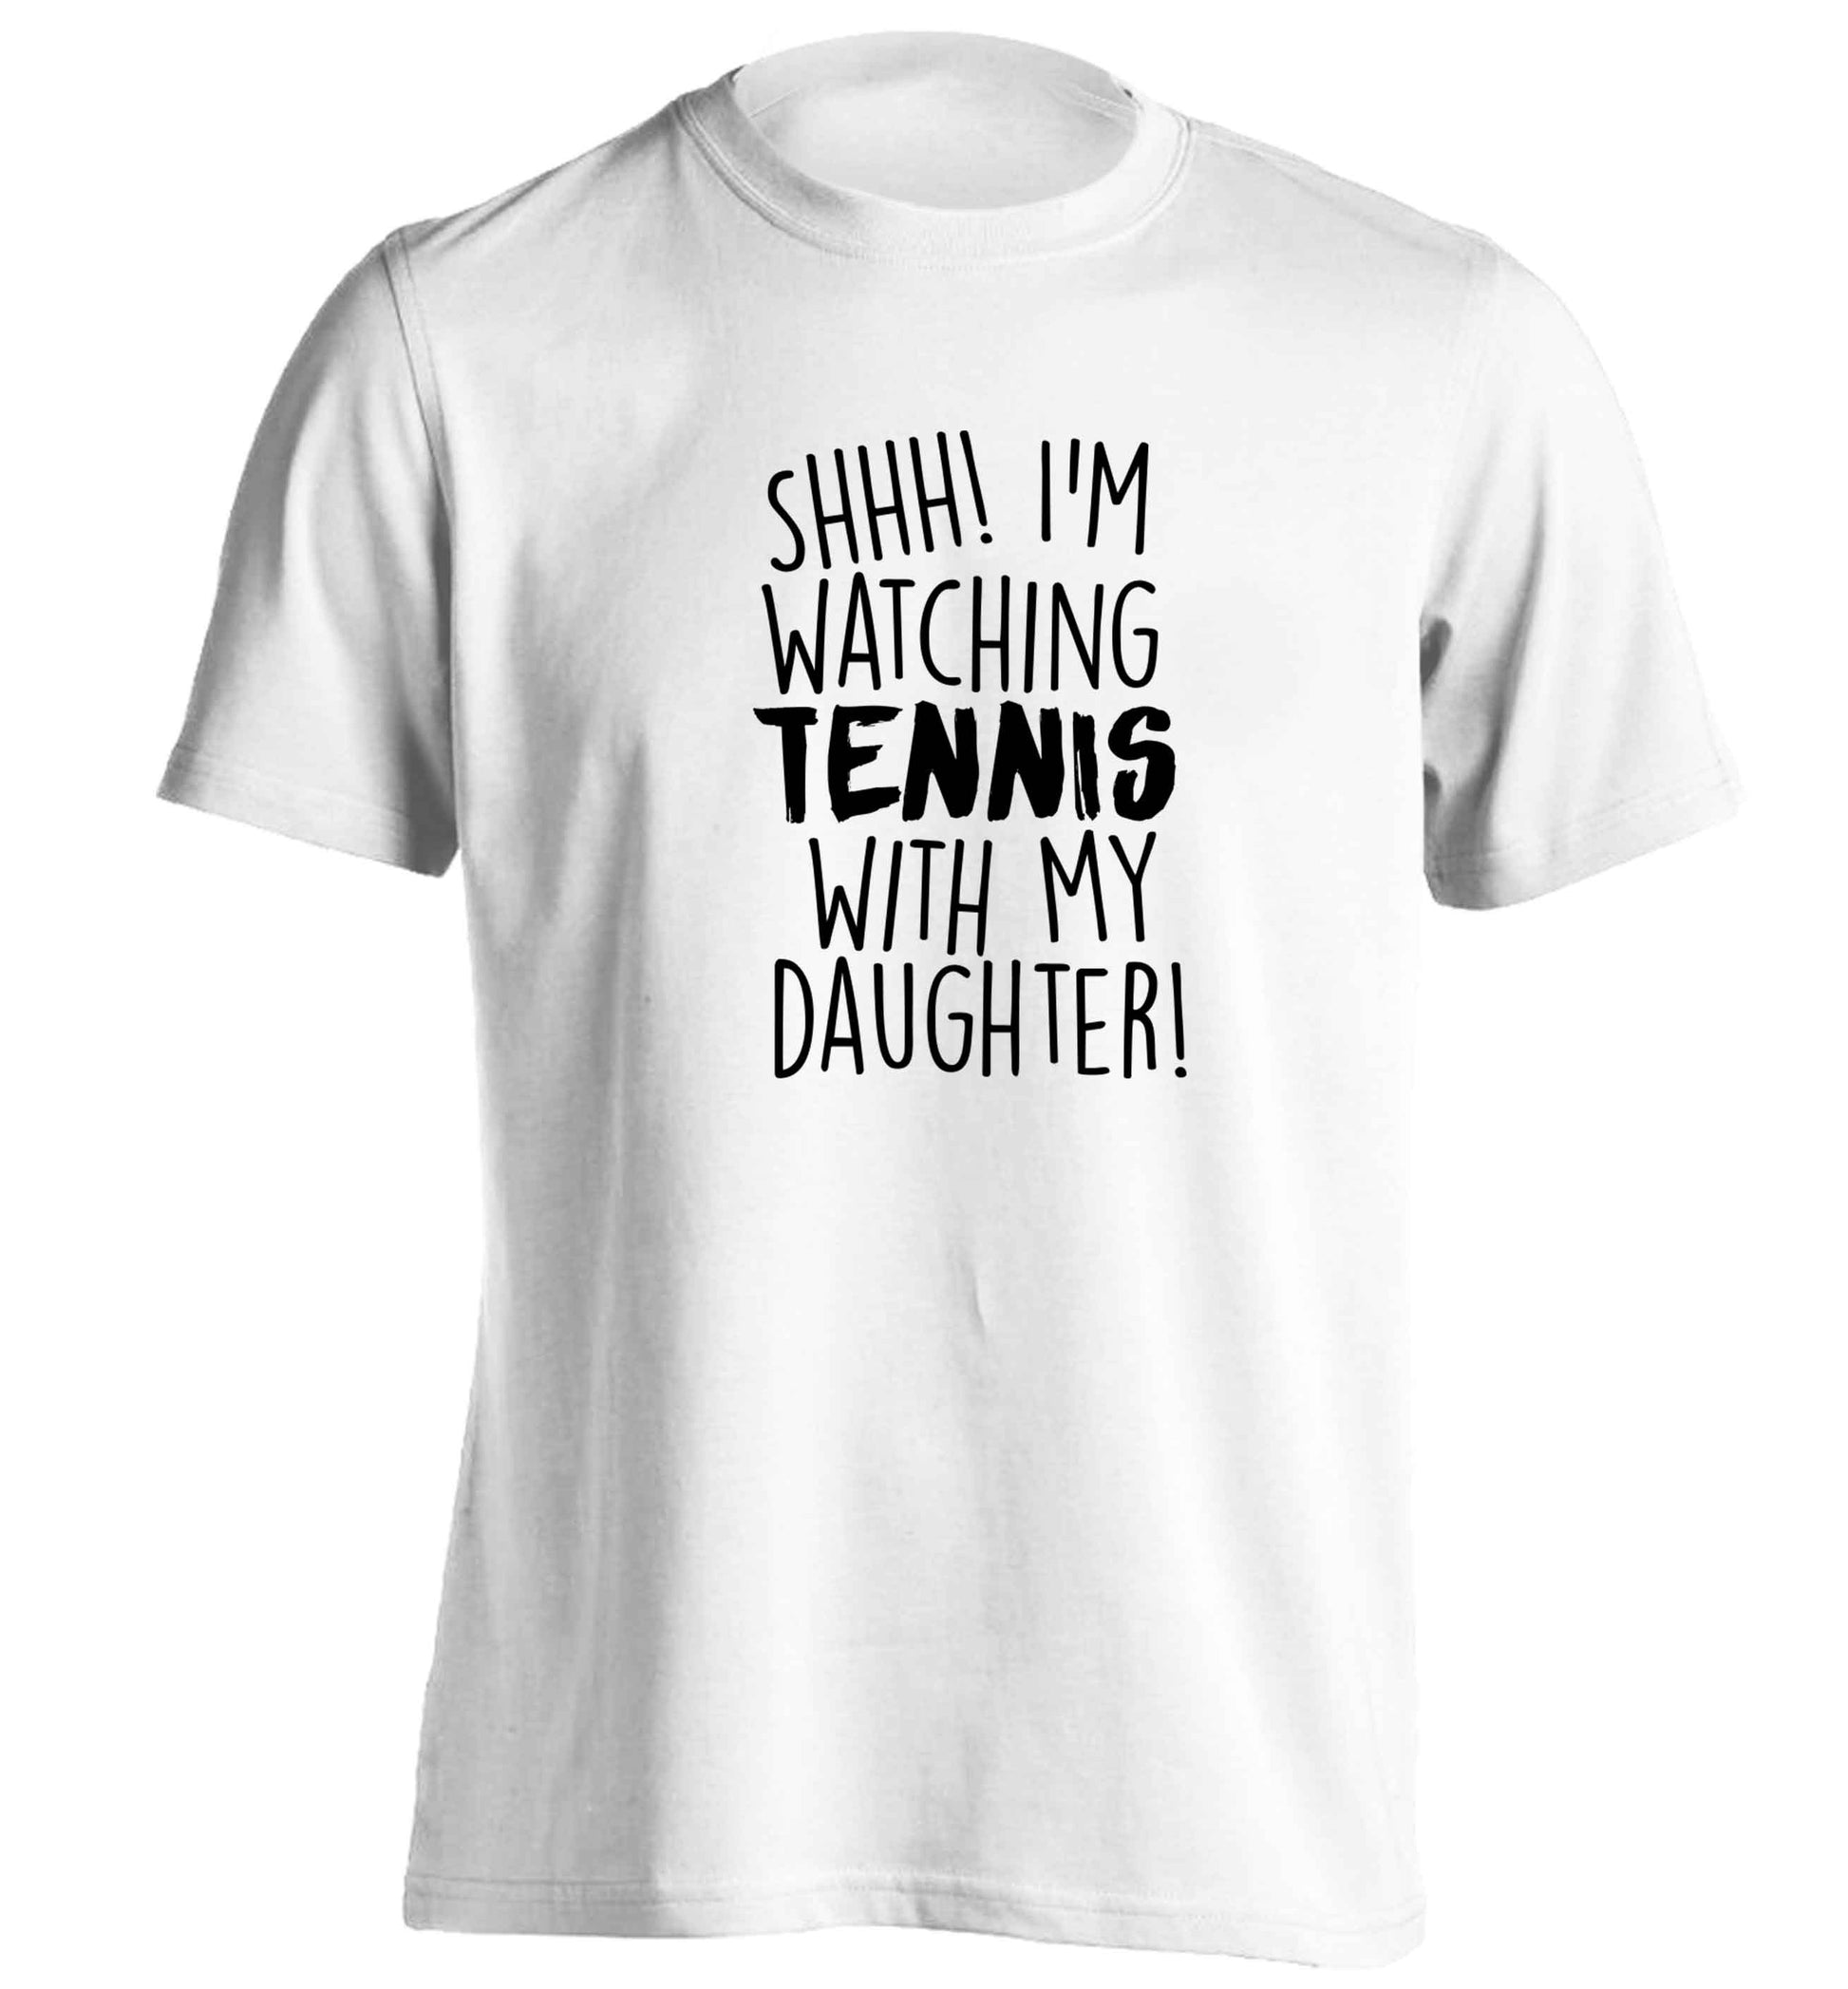 Shh! I'm watching tennis with my daughter! adults unisex white Tshirt 2XL